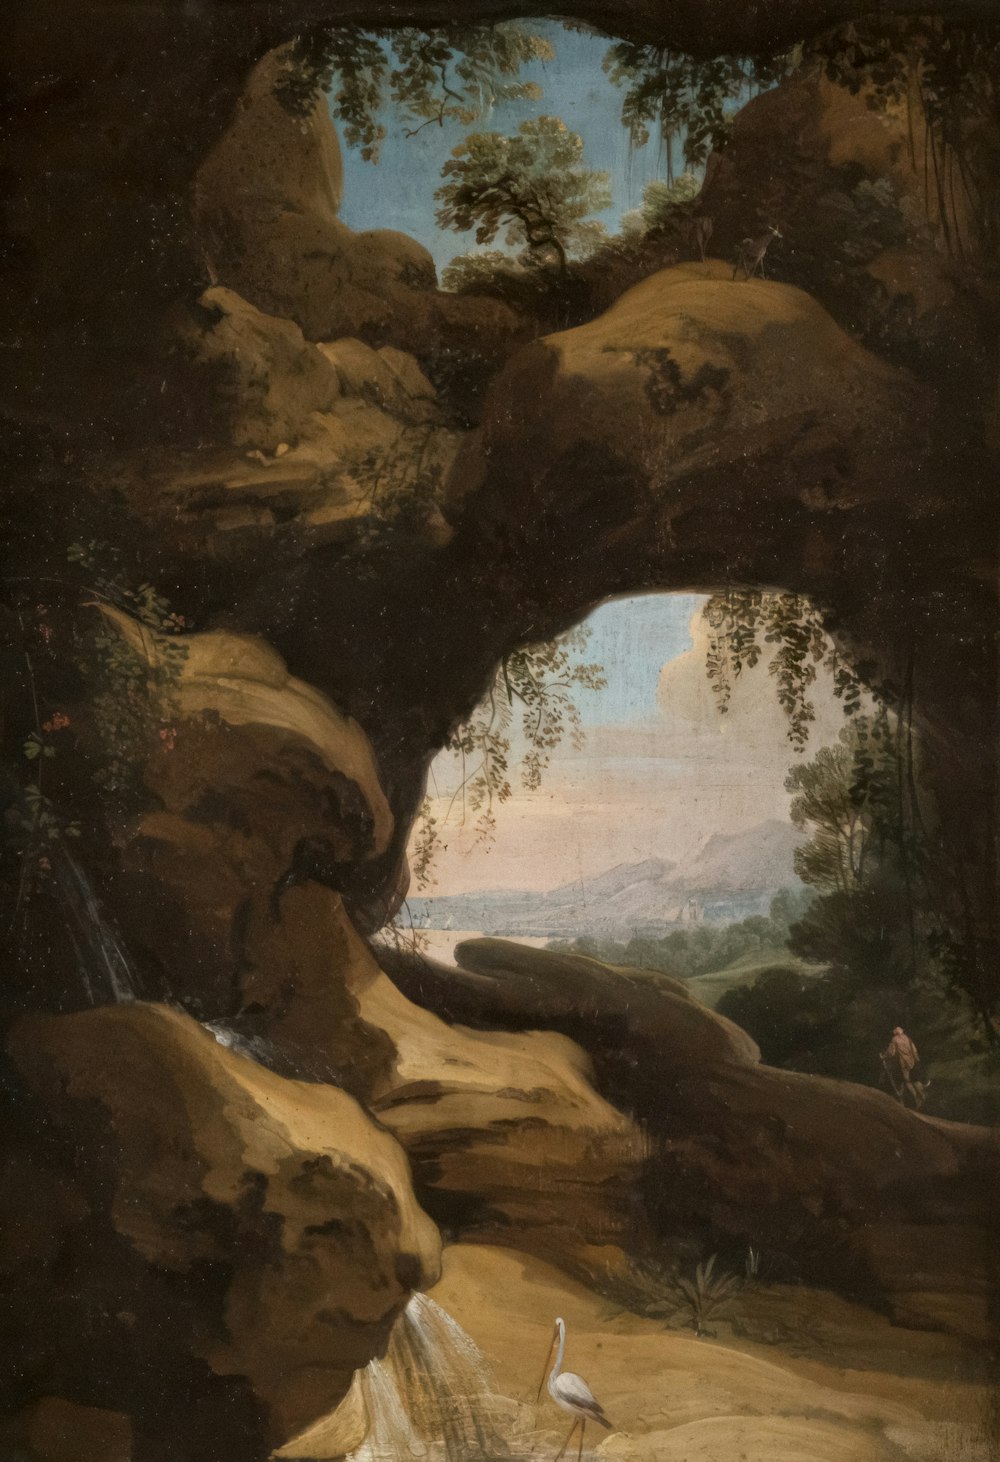 a painting of a bird standing in a cave